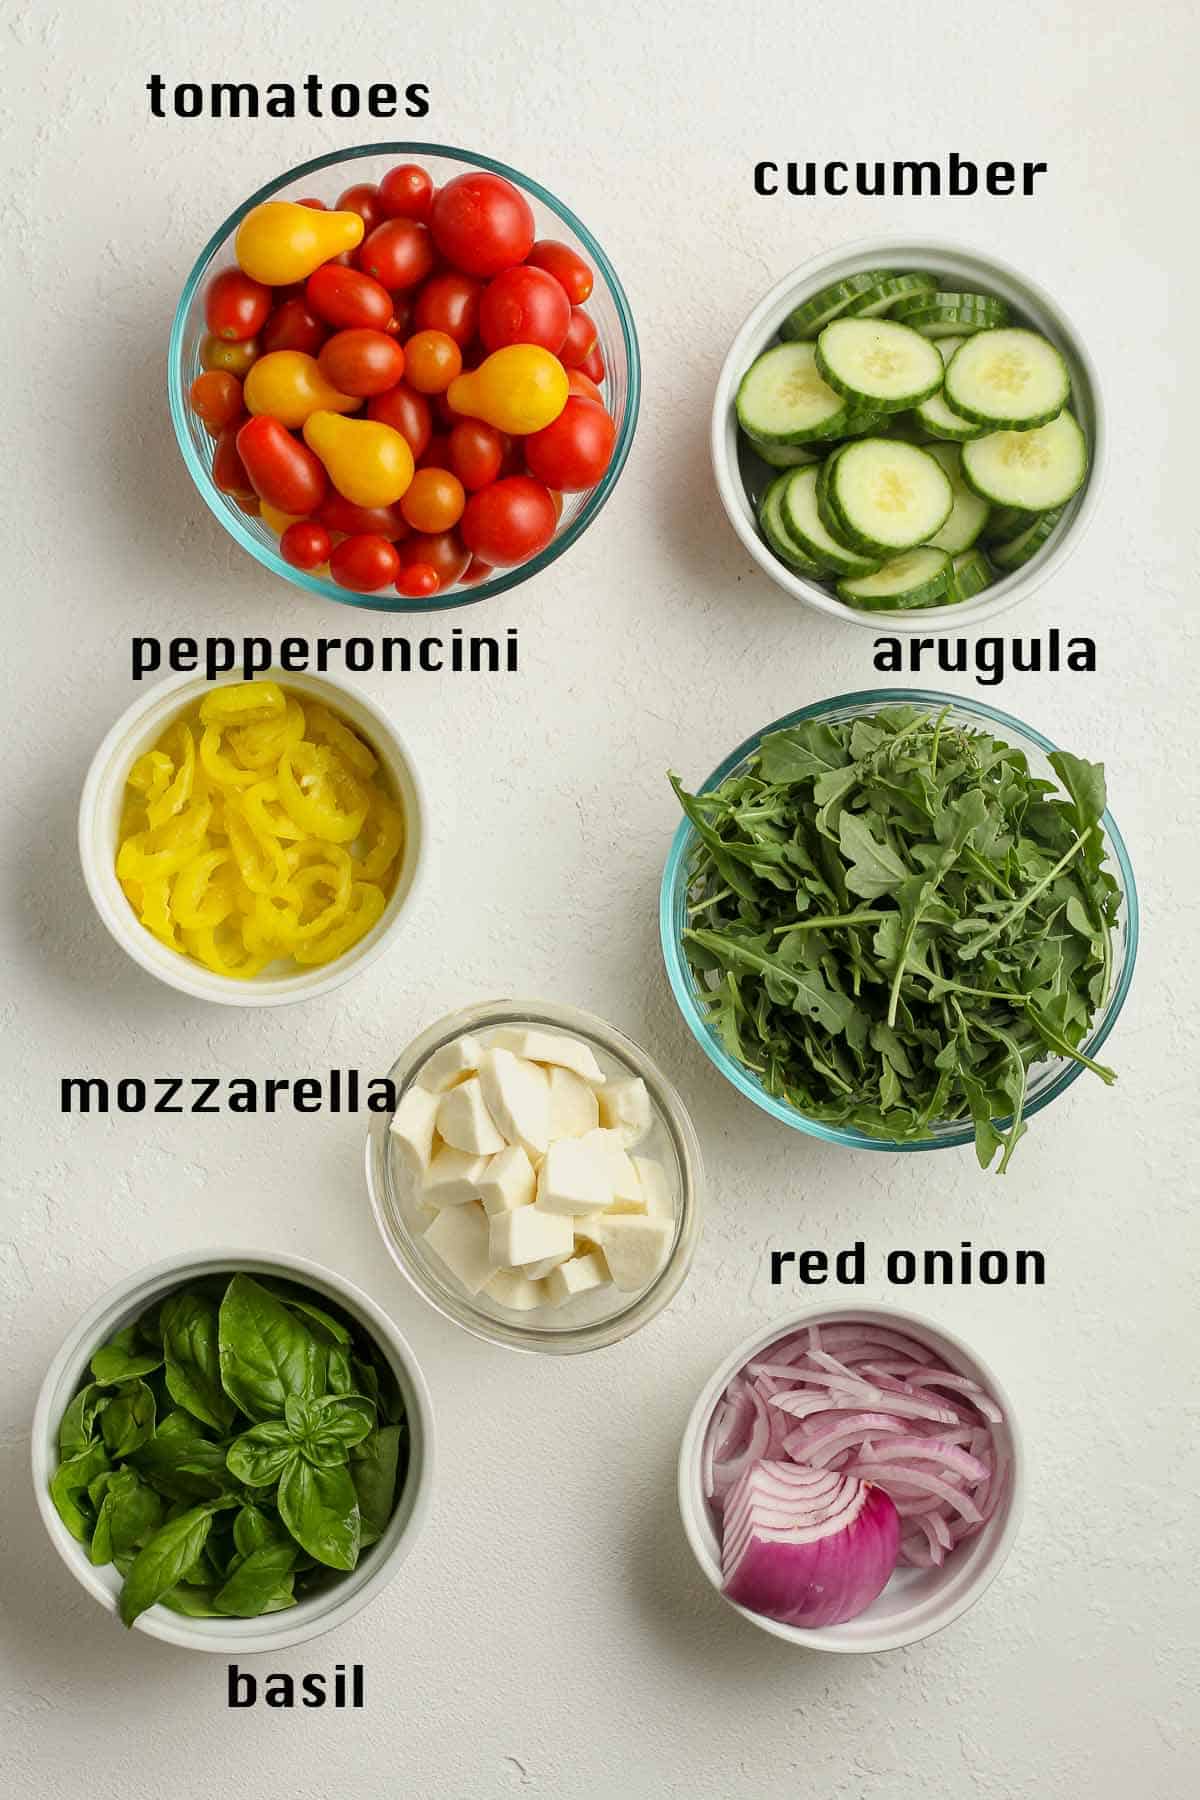 The ingredients in separate bowls.